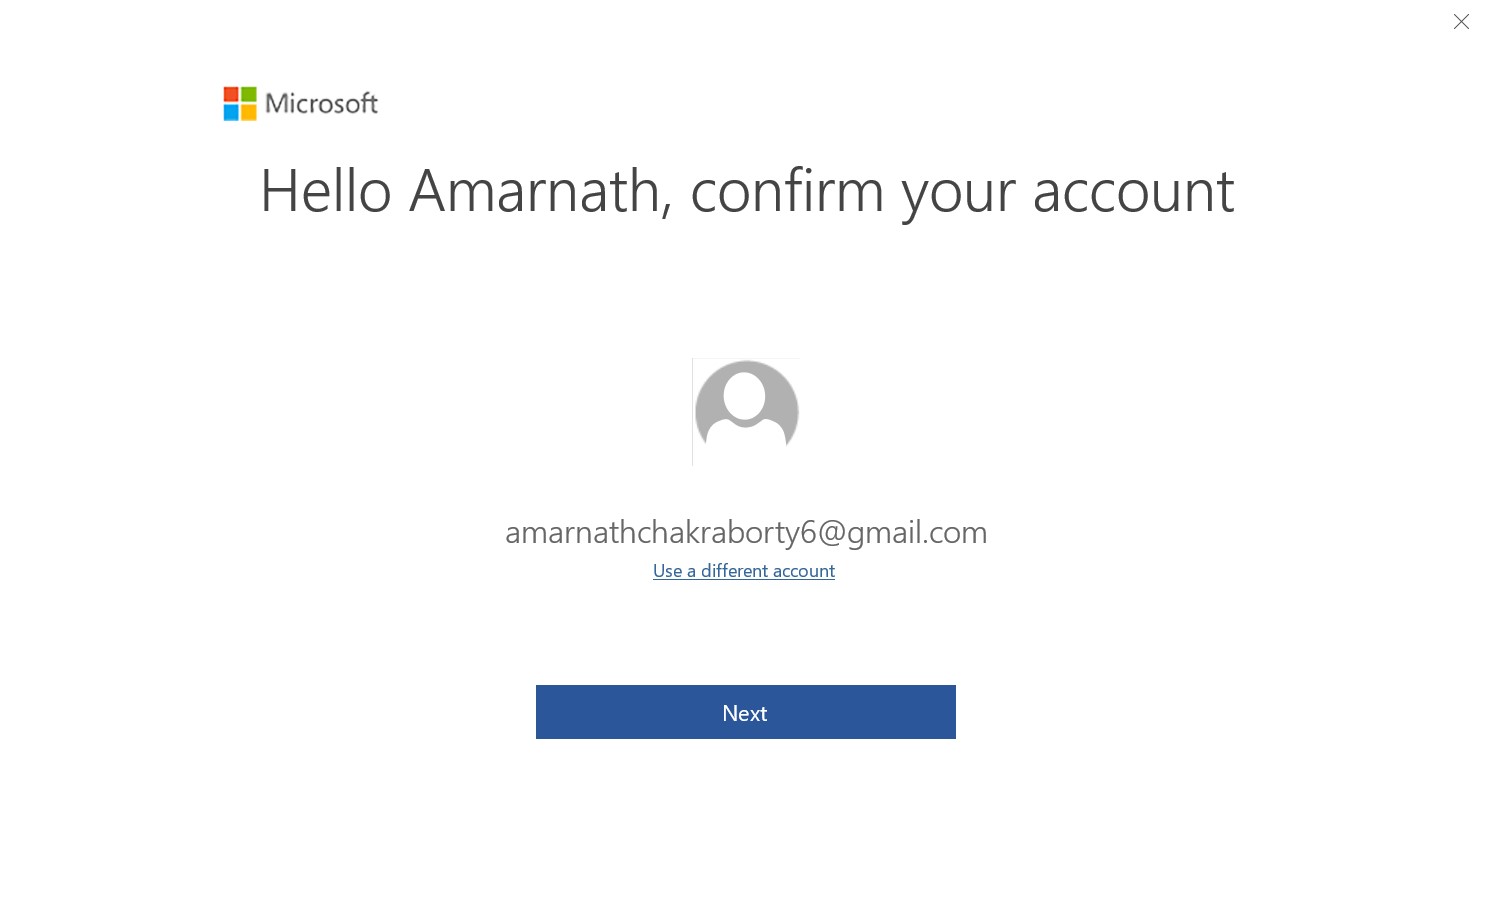 signed in with the same Microsoft account y